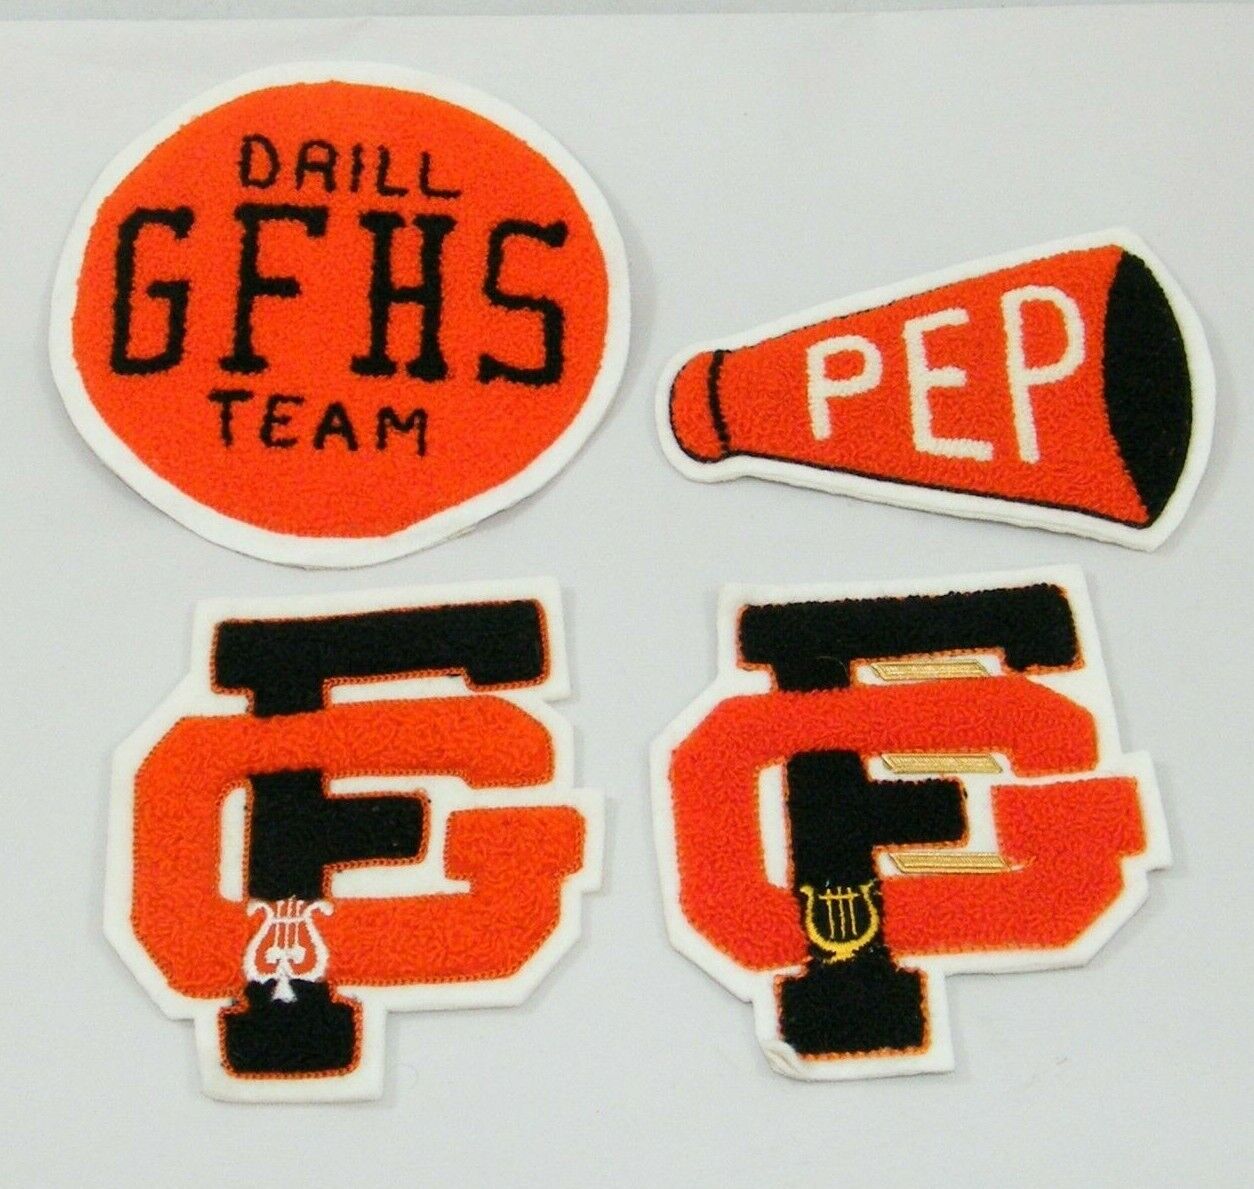 NEW NOS GFHS; GRANITE FALLS HIGH SCHOOL DRILL TEAM PEP PATCHES